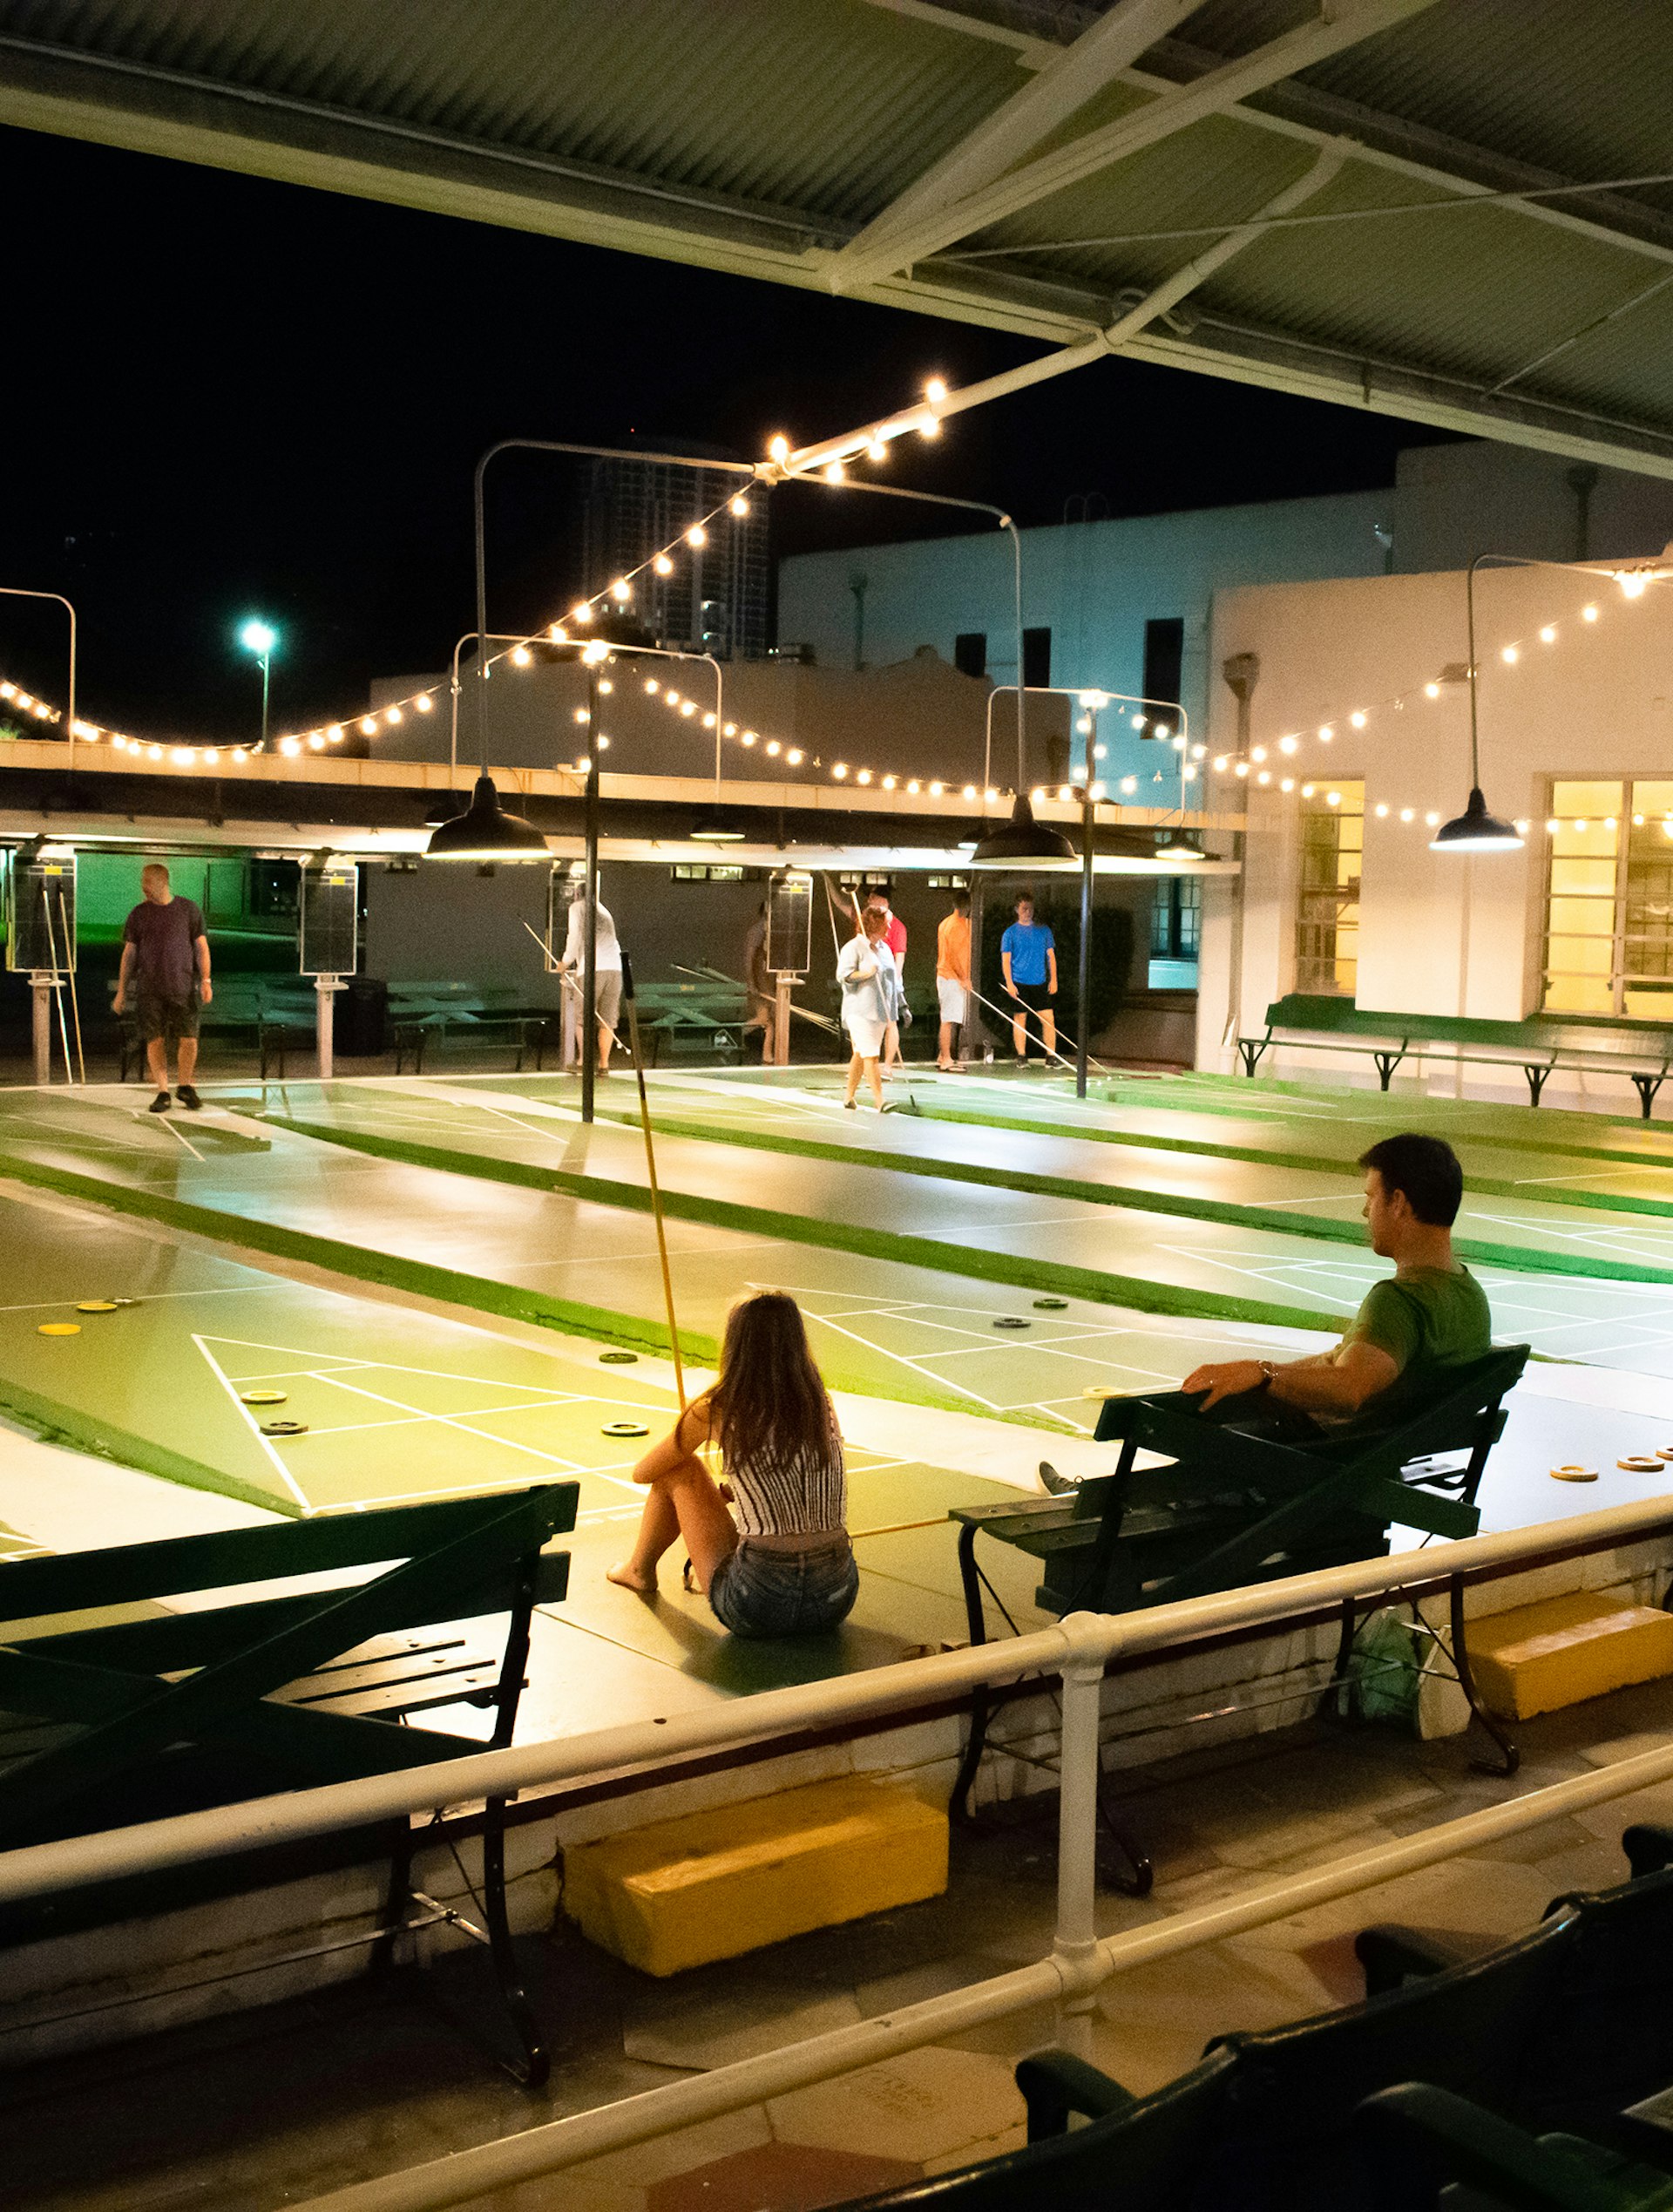 Group of people playing shuffleboard in St Petersburg. The club is open air and lit with string lights as it is night time © Abbey Cory / Lonely Planet 